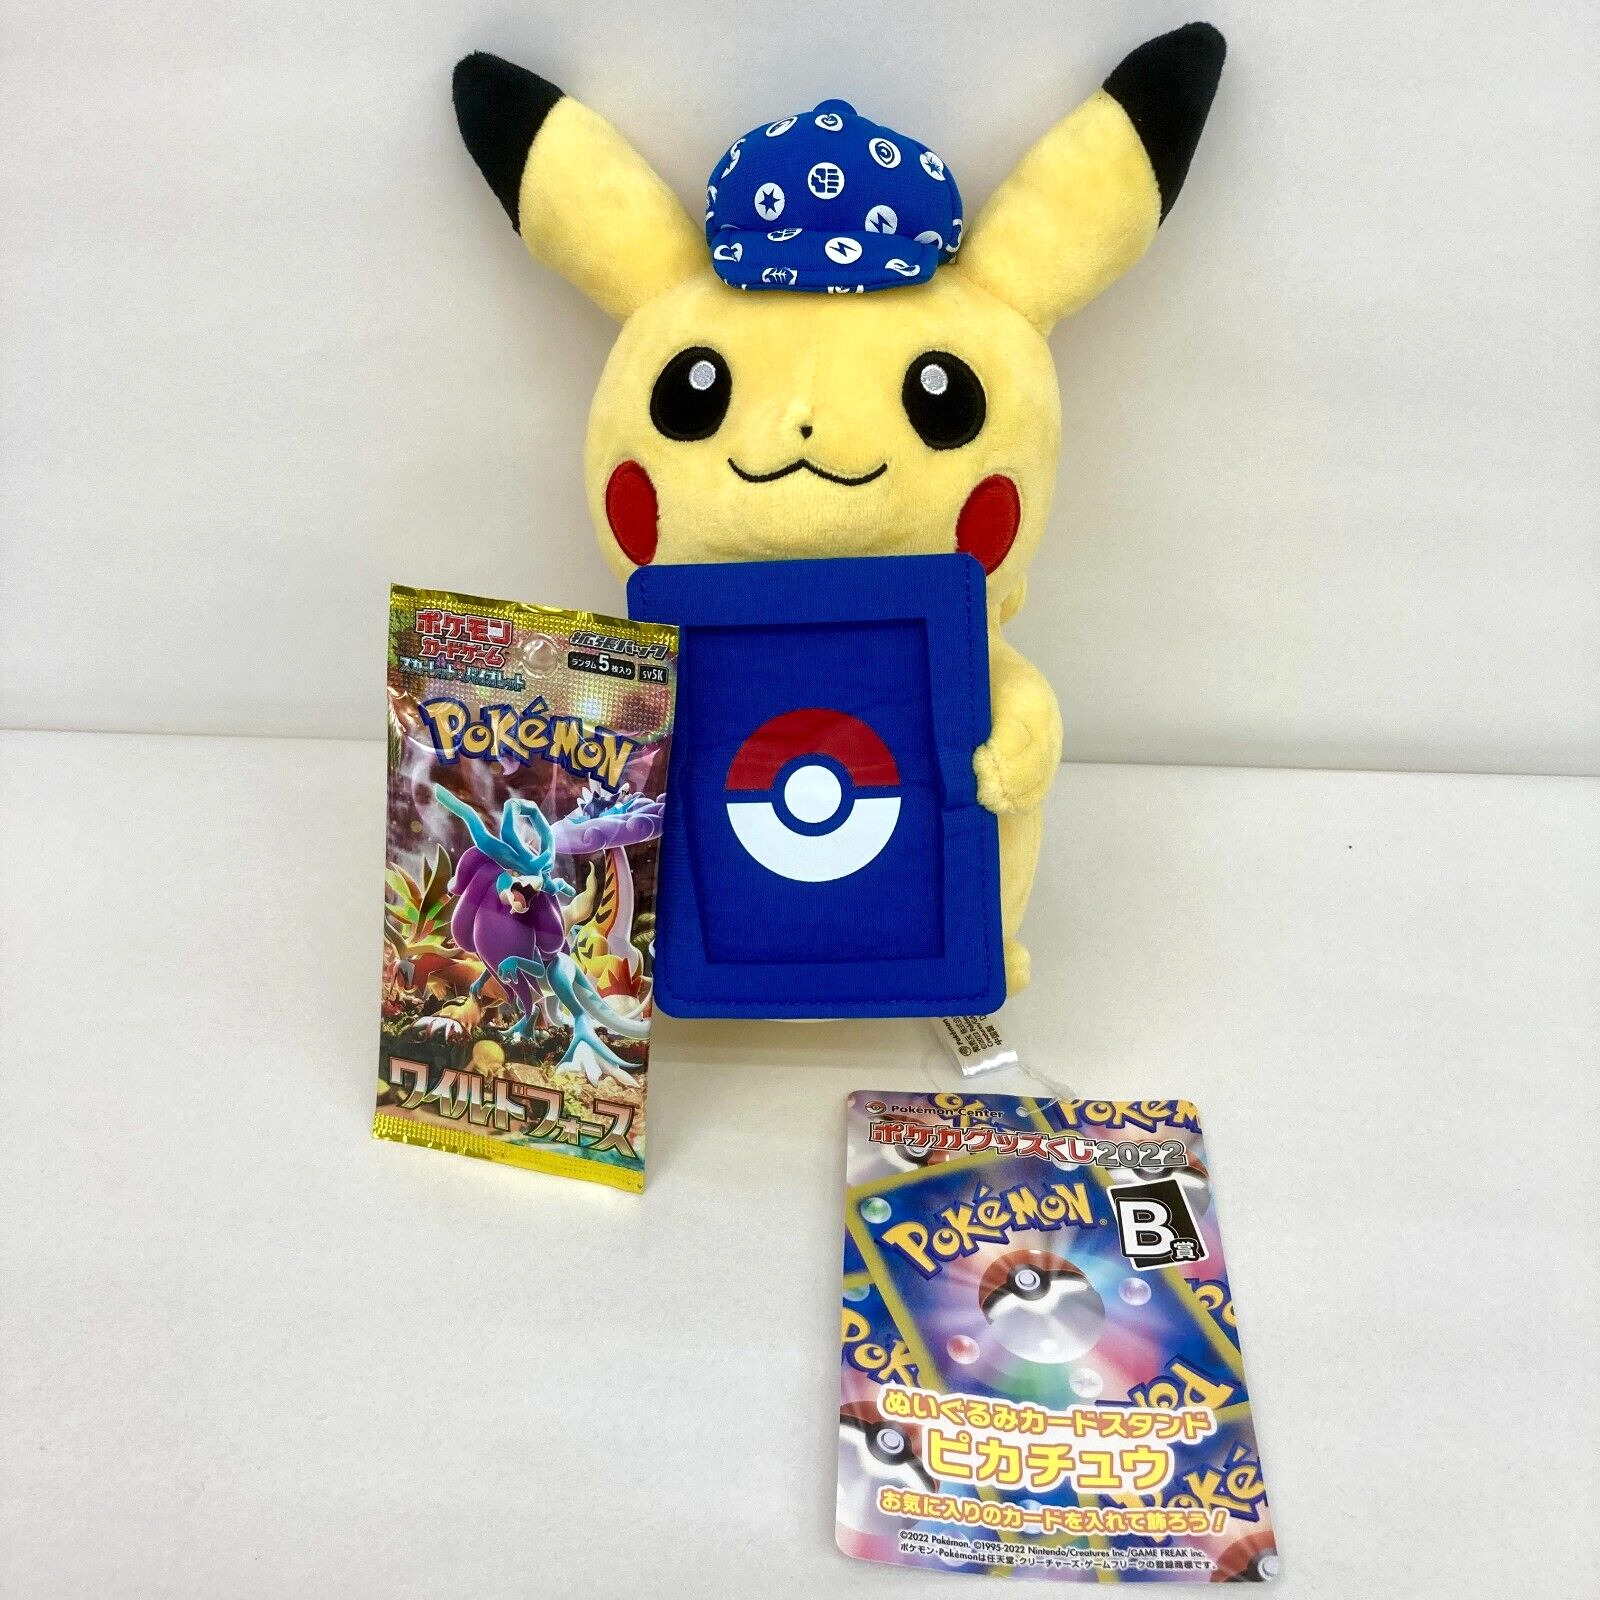 Japan Pikachu Plush Pokeca Holder 2022 Lottery Prize With Unopened New Card Pack